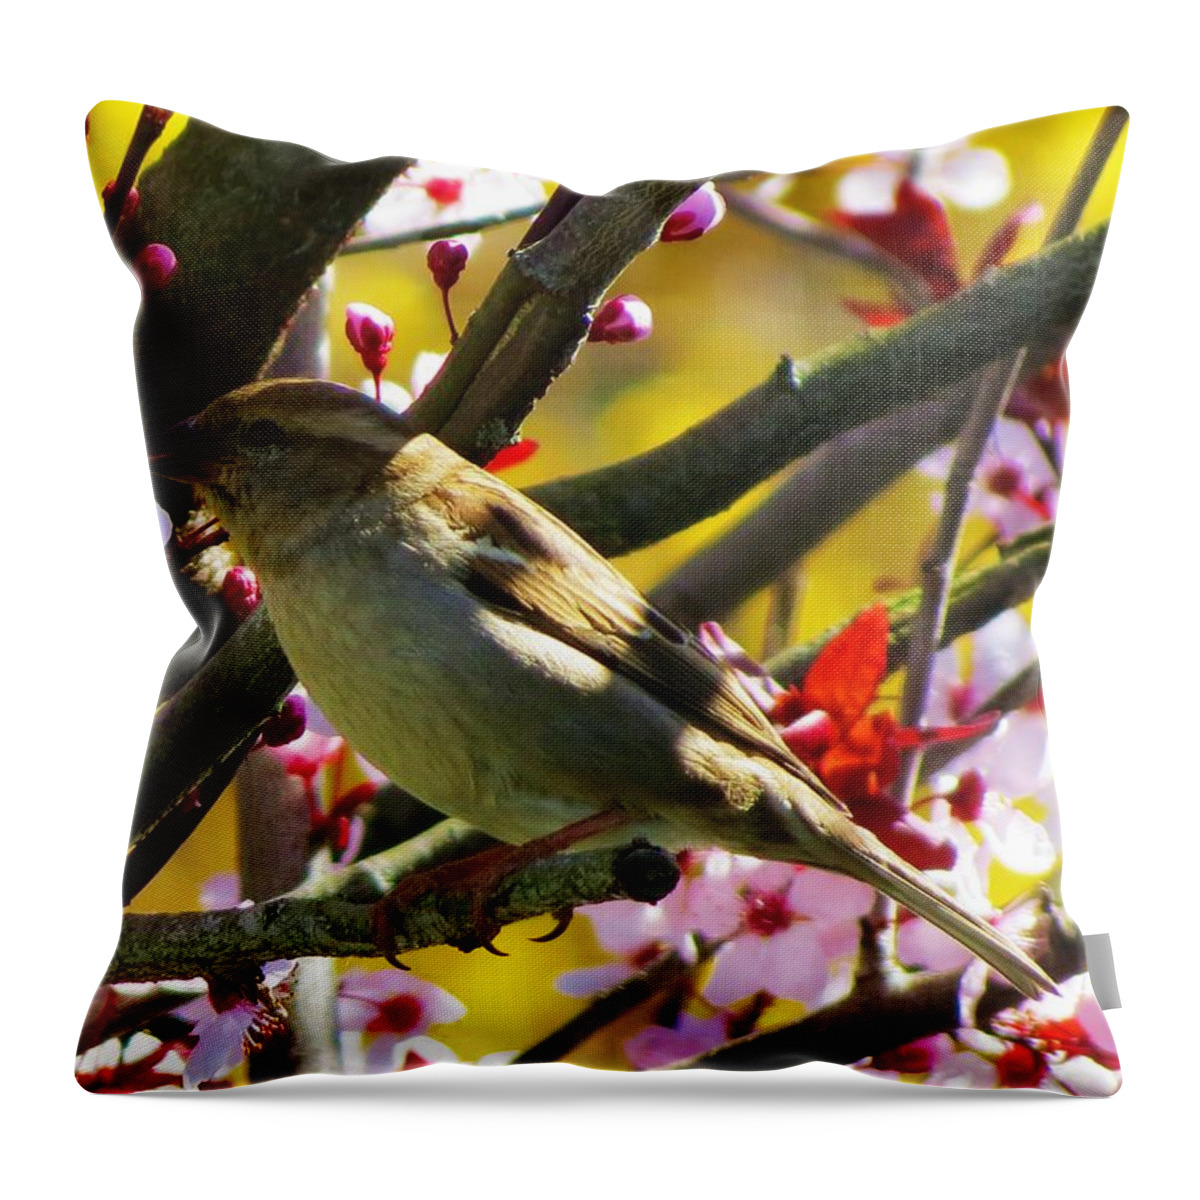 Spring Throw Pillow featuring the photograph Spring Sparrow by Vijay Sharon Govender